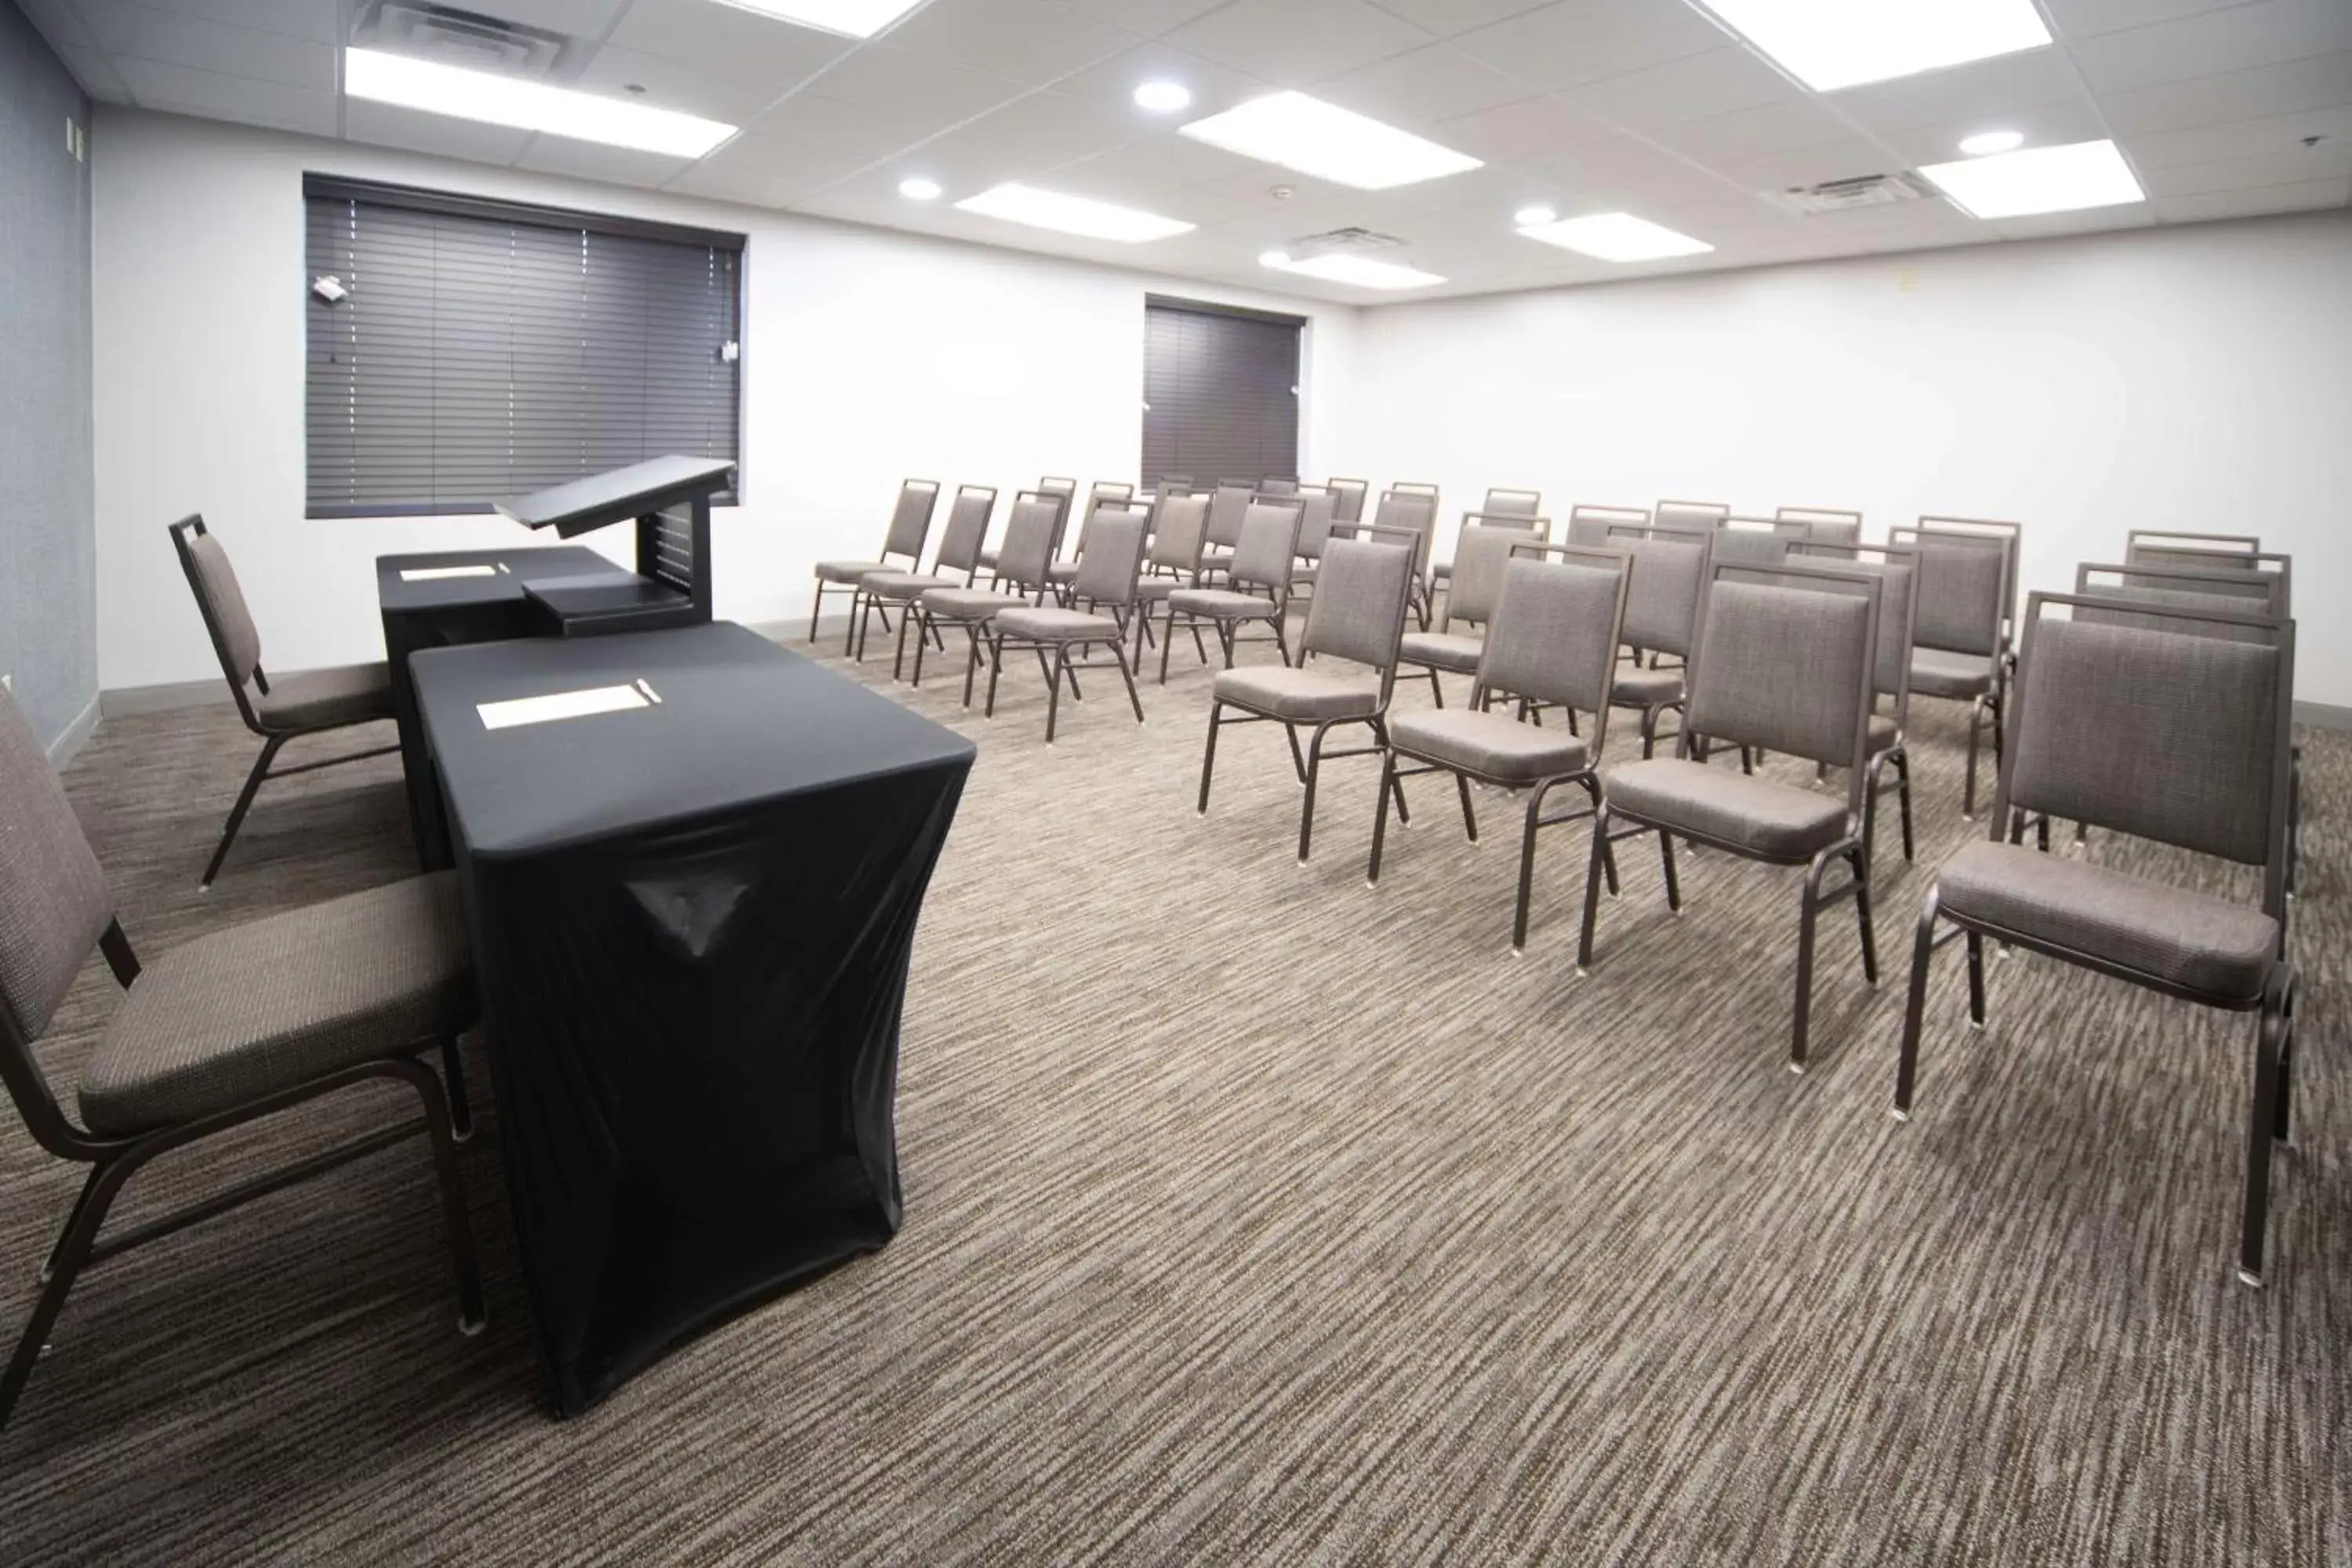 Property building, Business Area/Conference Room in Country Inn & Suites by Radisson, Stone Mountain, GA